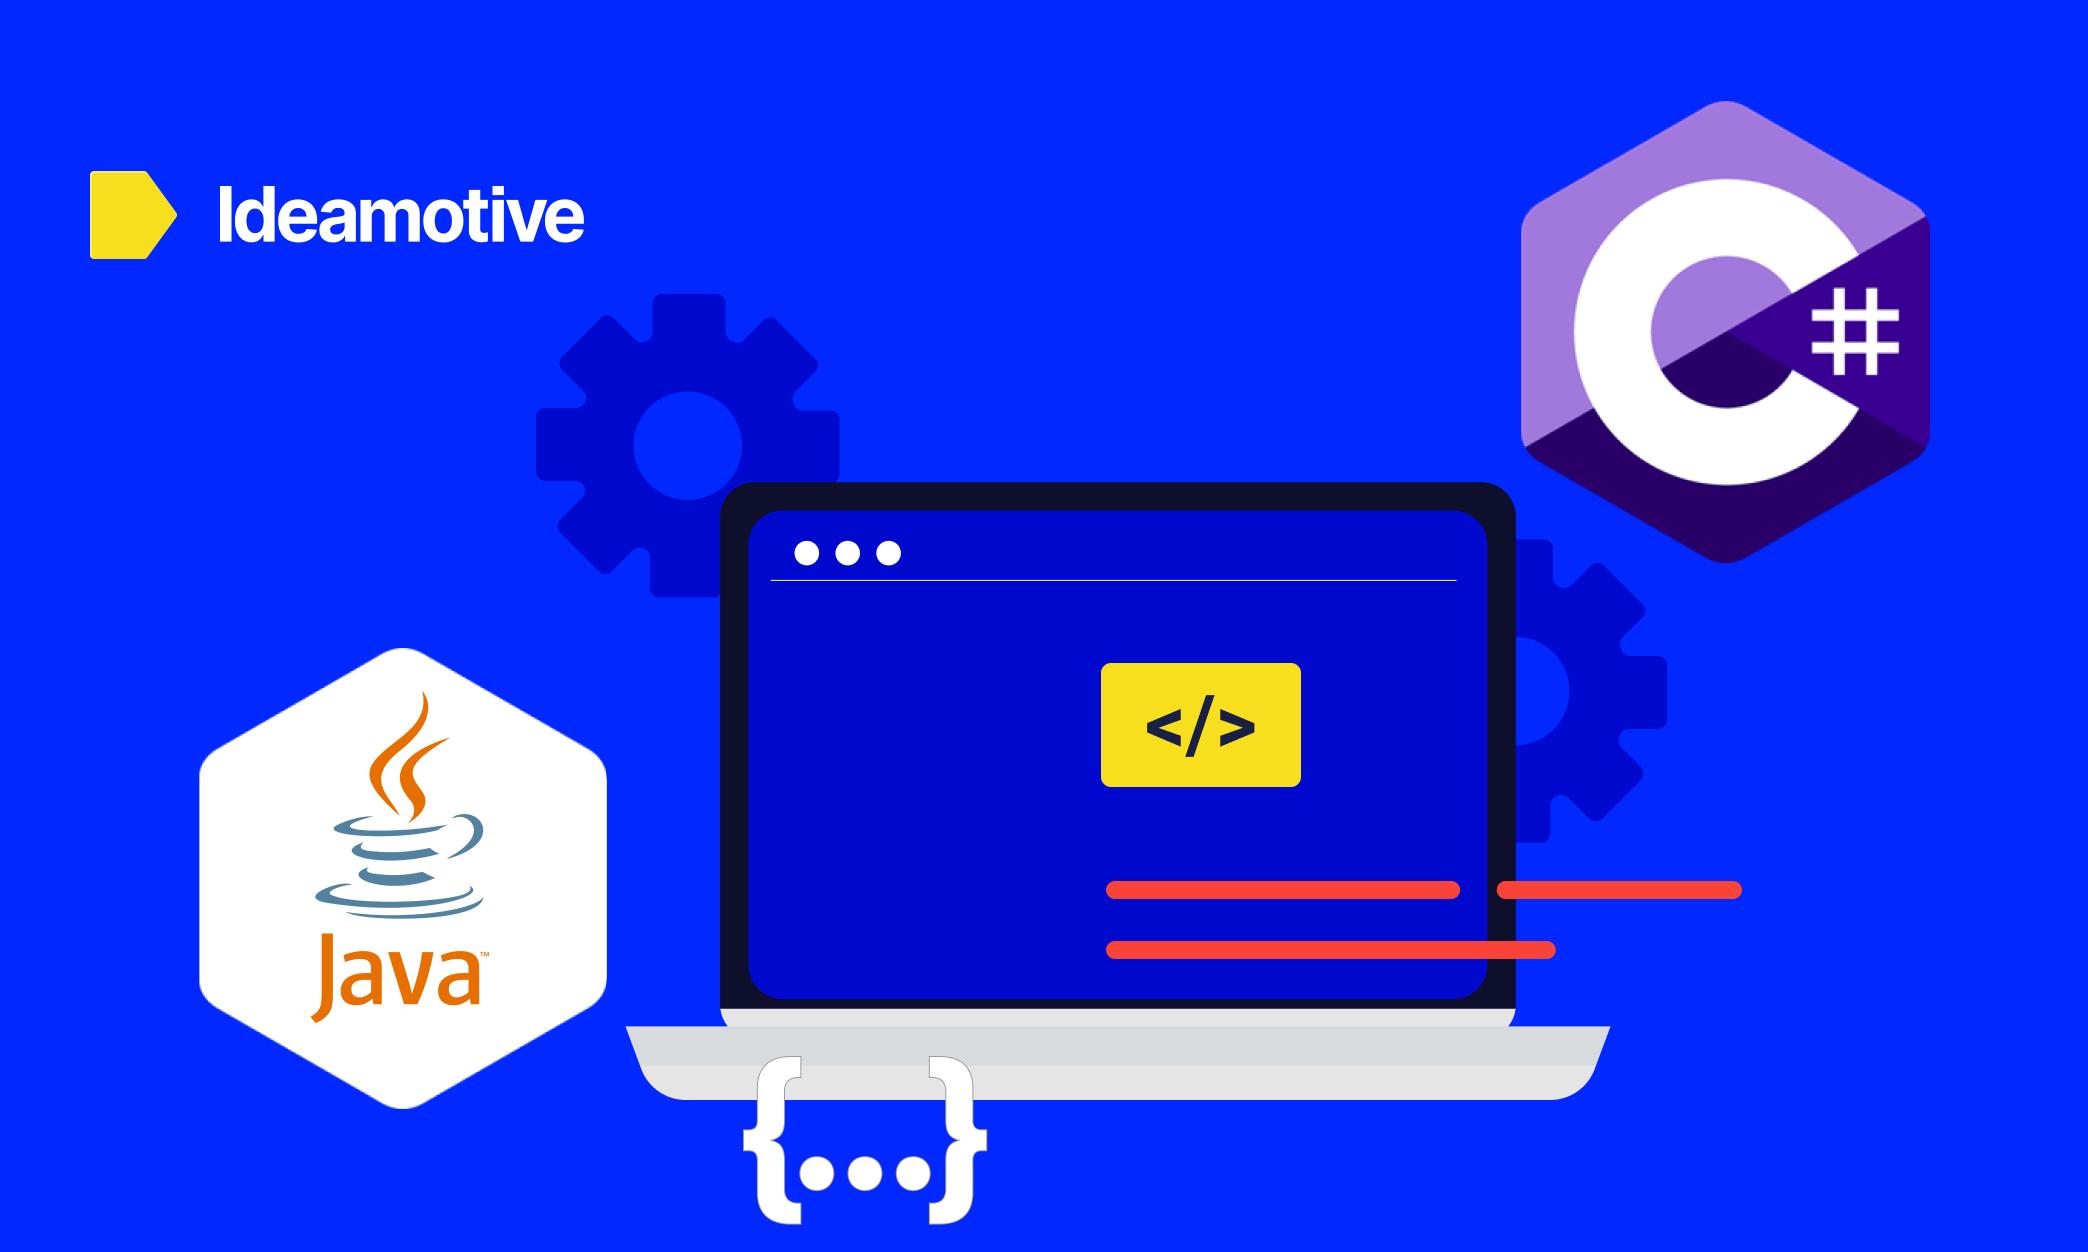 C# vs Java: Which Is Better For Building Your Product?